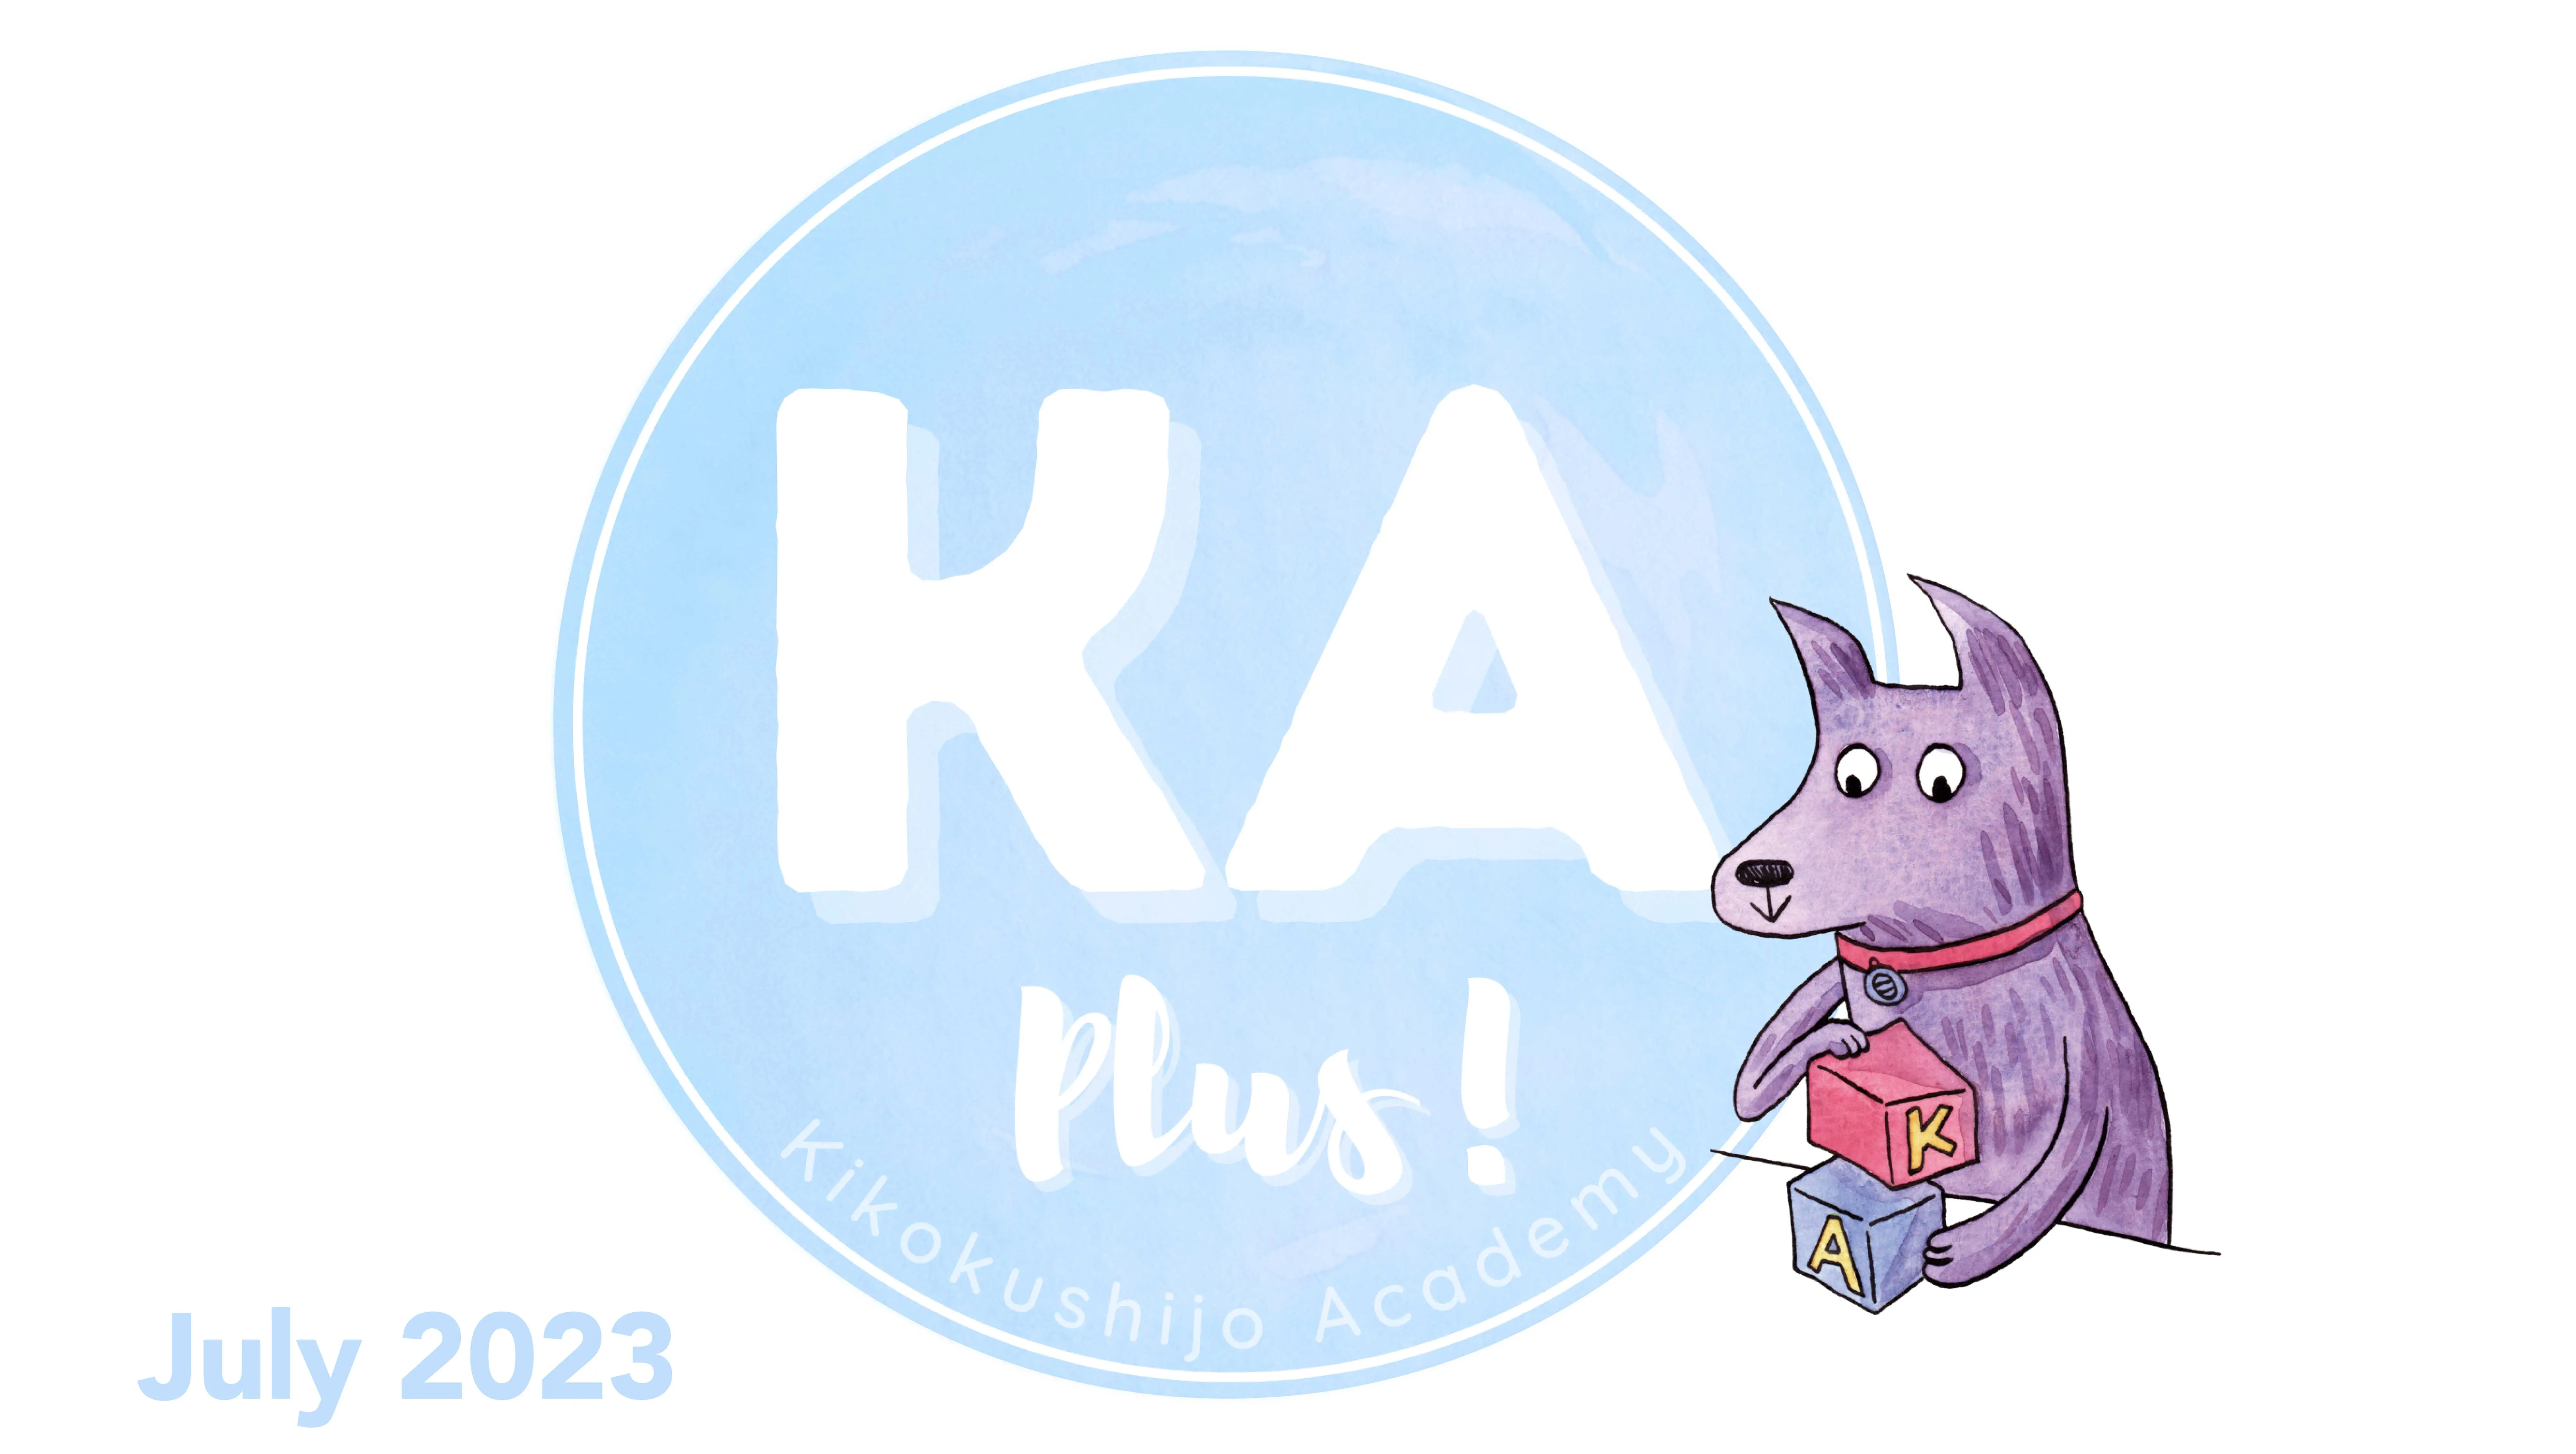 What's new on KA Plus! - July 2023